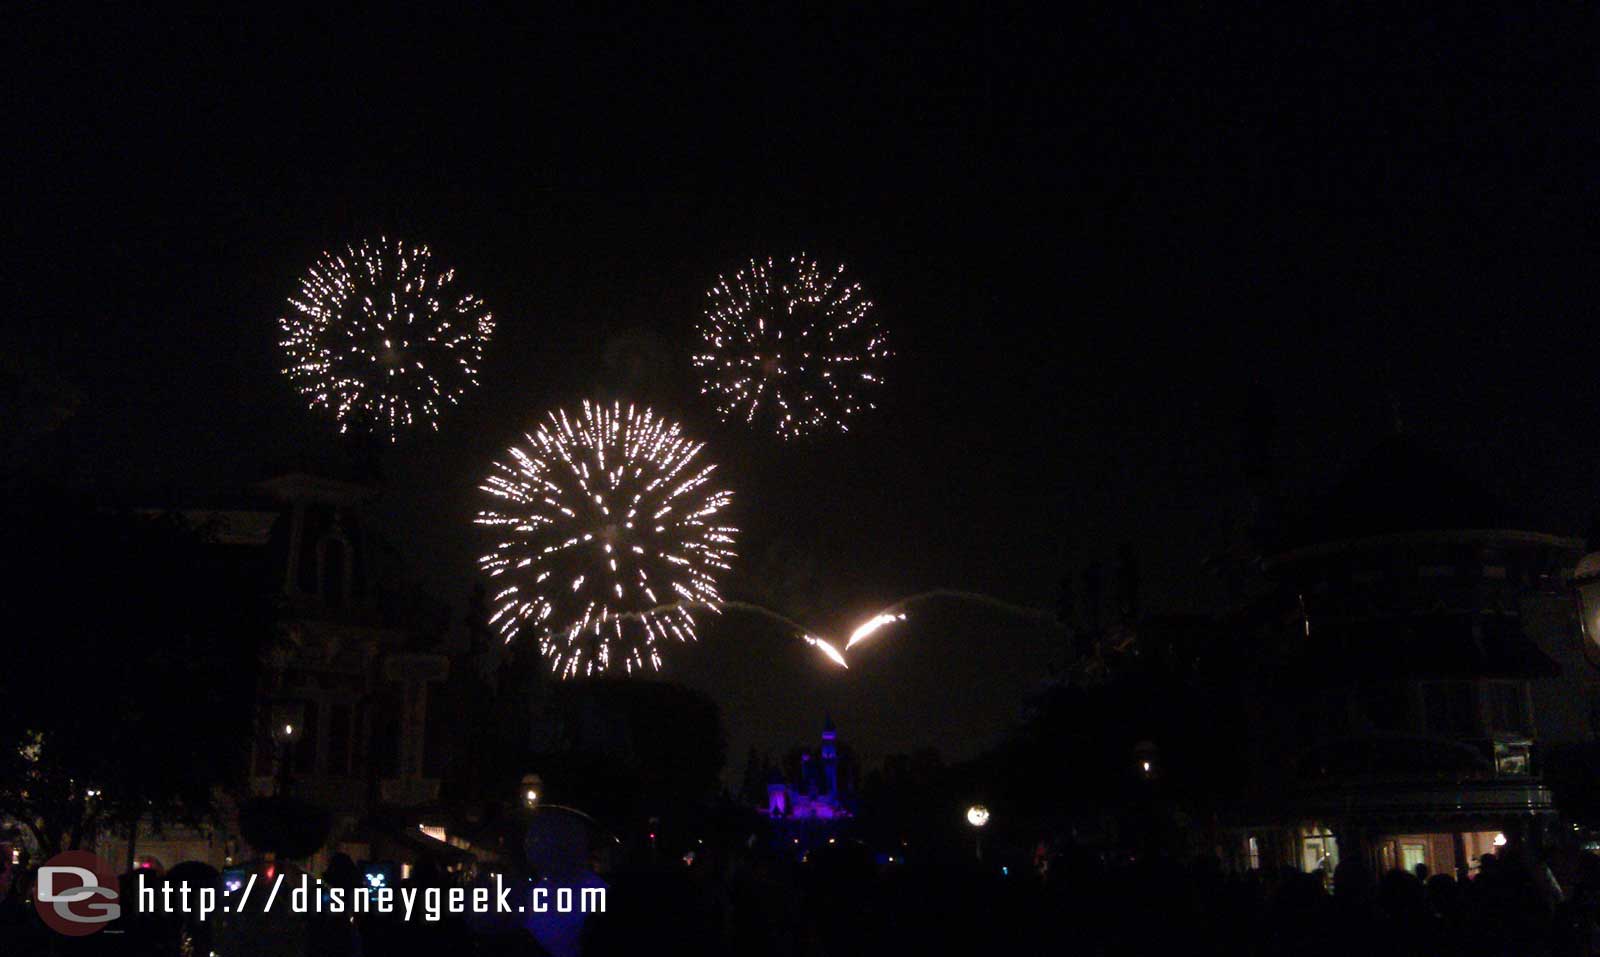 Closing out the evening with Remember Dreams Come True fireworks